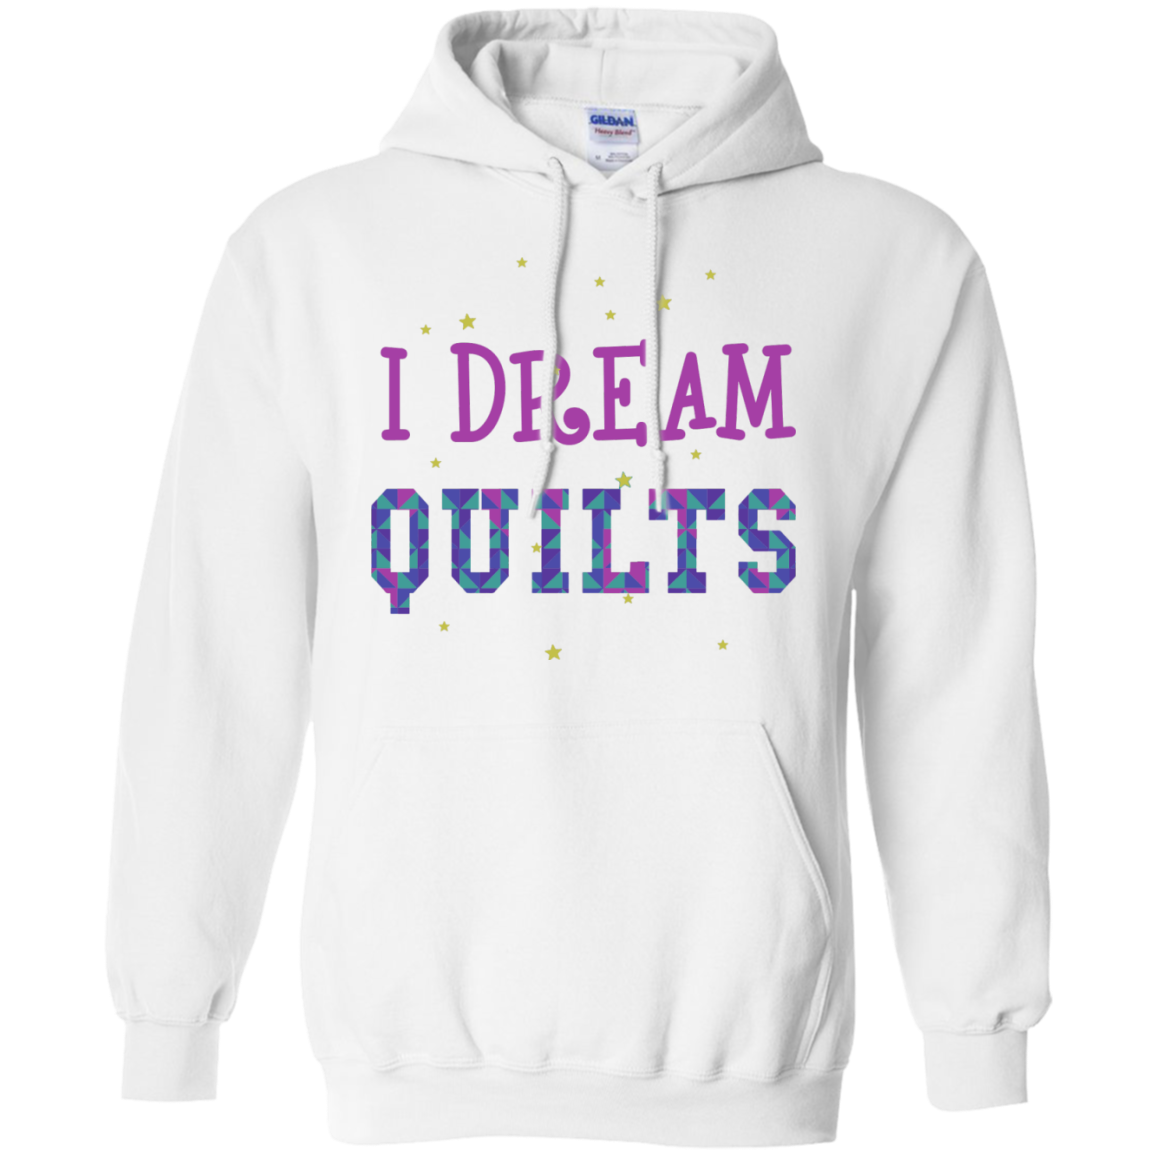 I Dream Quilts Pullover Hoodie - Crafter4Life - 3